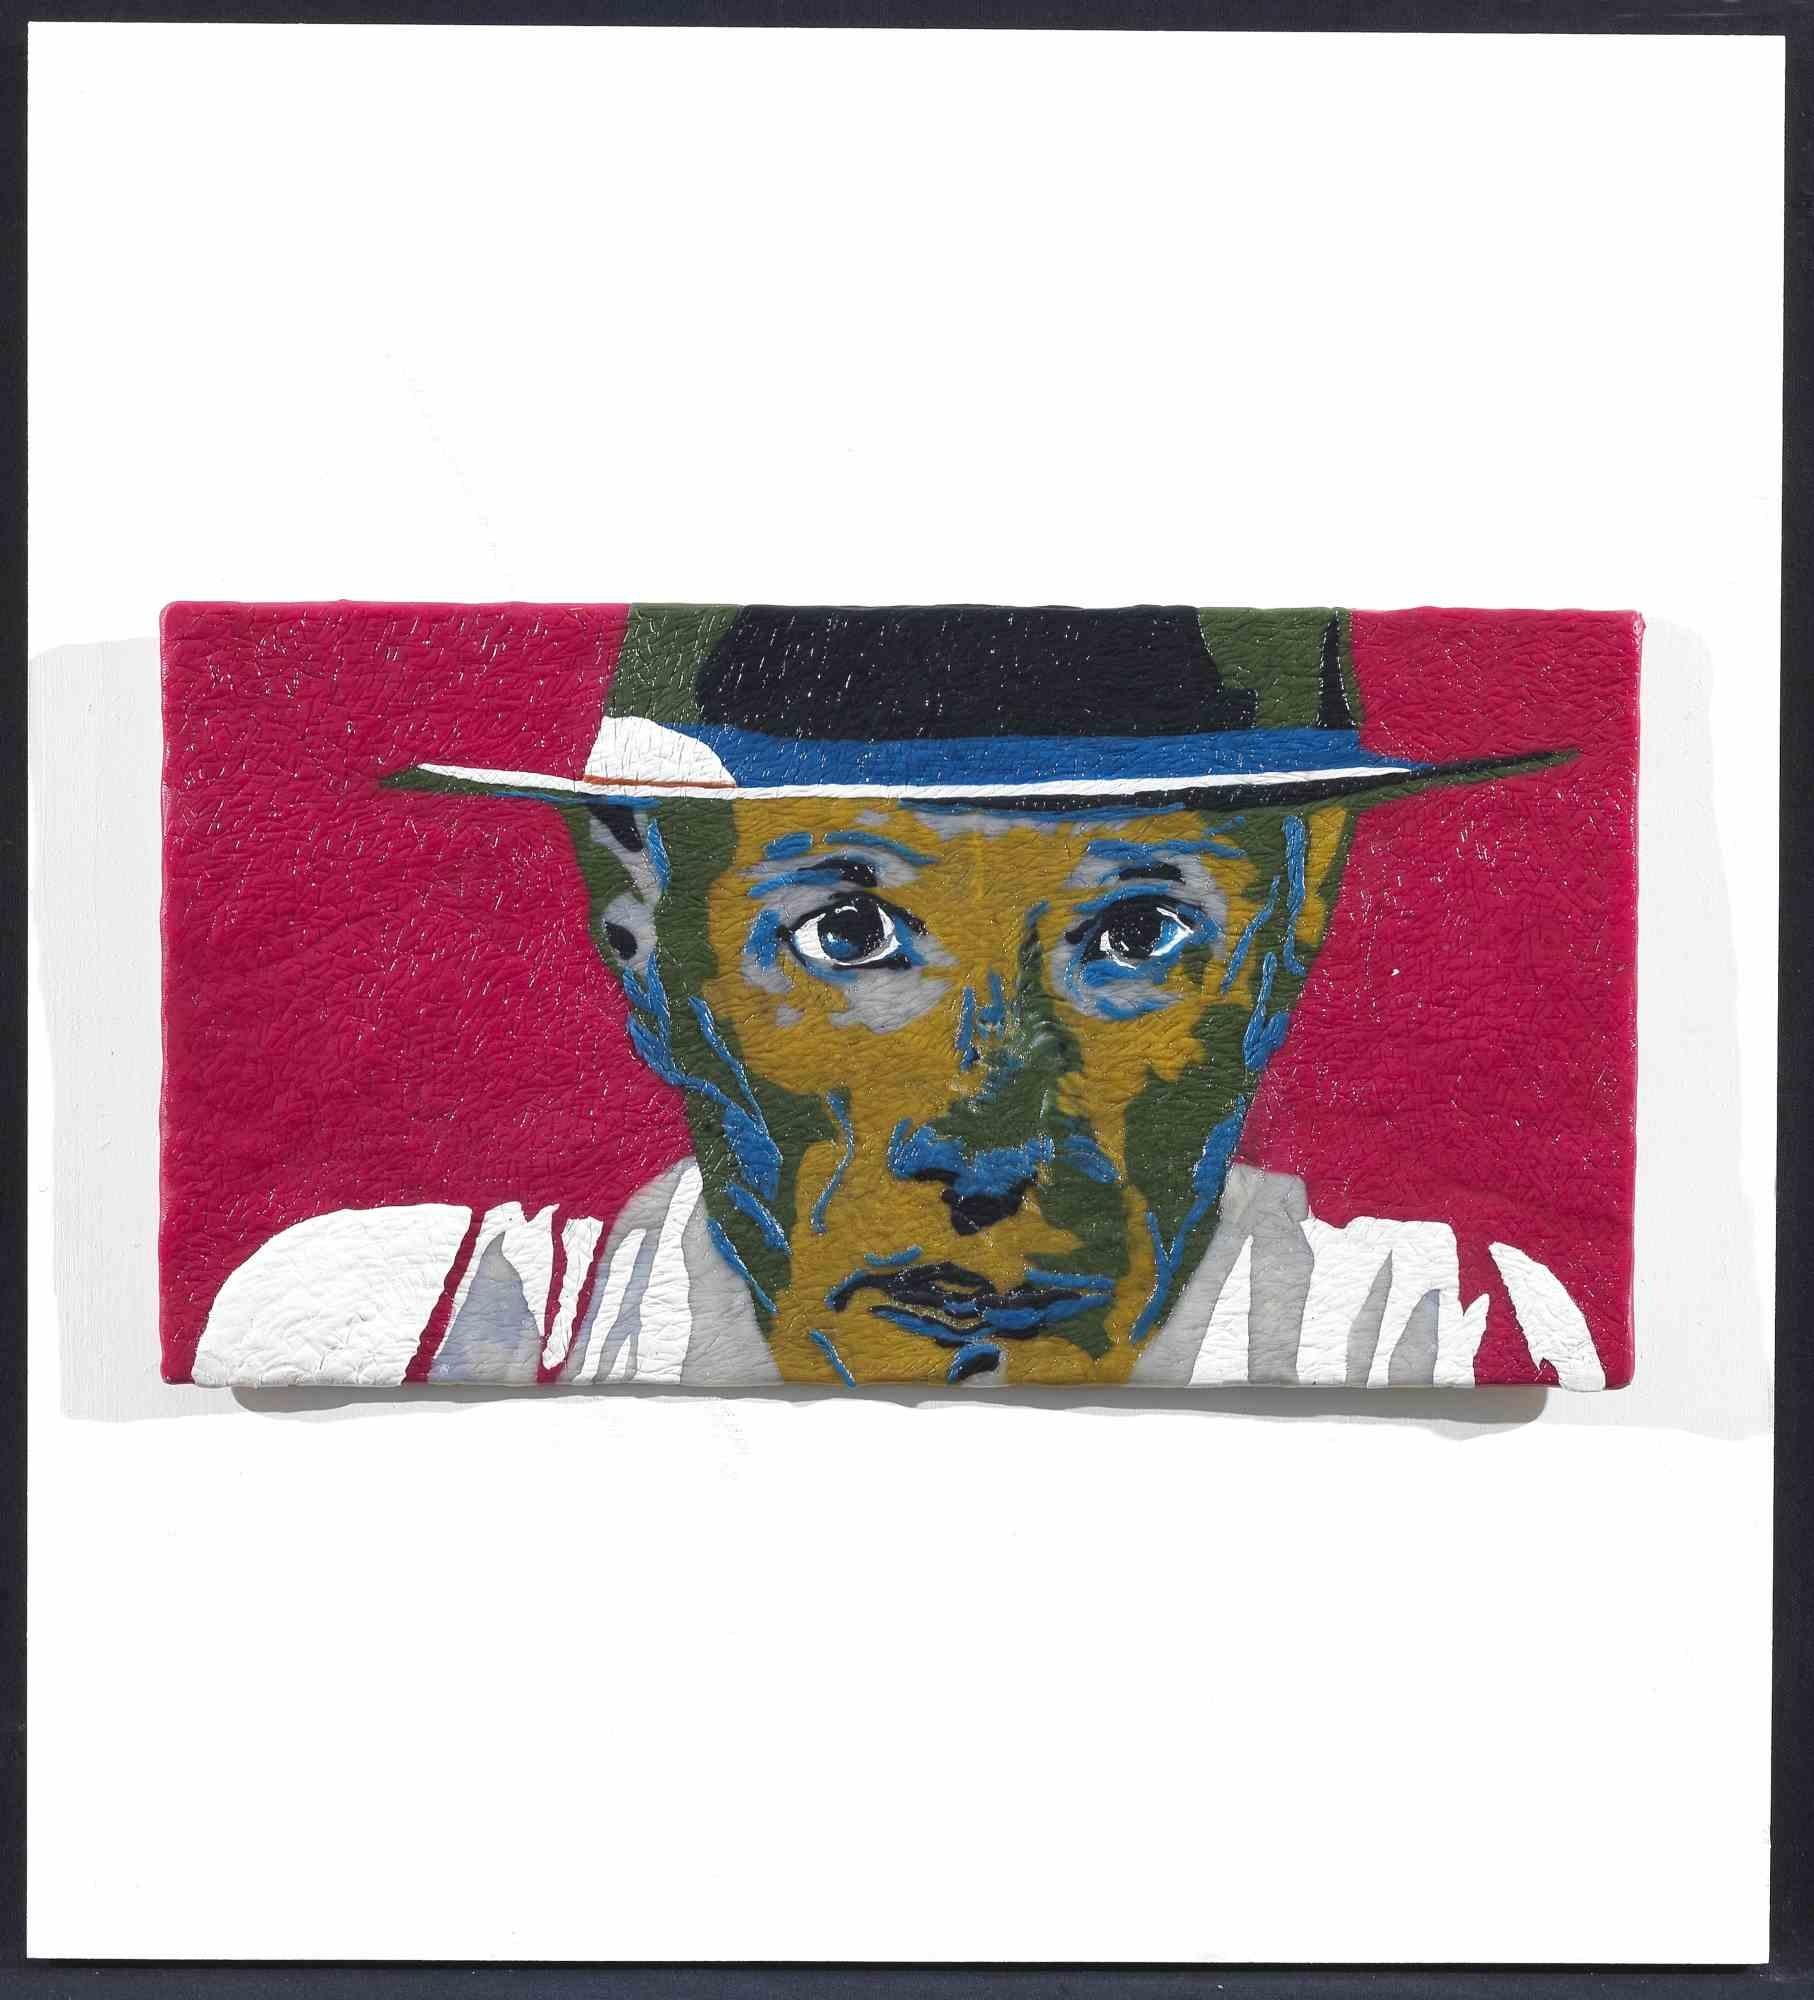 G. Beuys is an original Contemporary Arwork realized by the Italian artist Maurizio Savini (b. Rome, 1962) in 2014. 

Original Encaustic of chewing gum on board. 

Hand-signed by the artist on the back of the artwork. 

The Certificate of